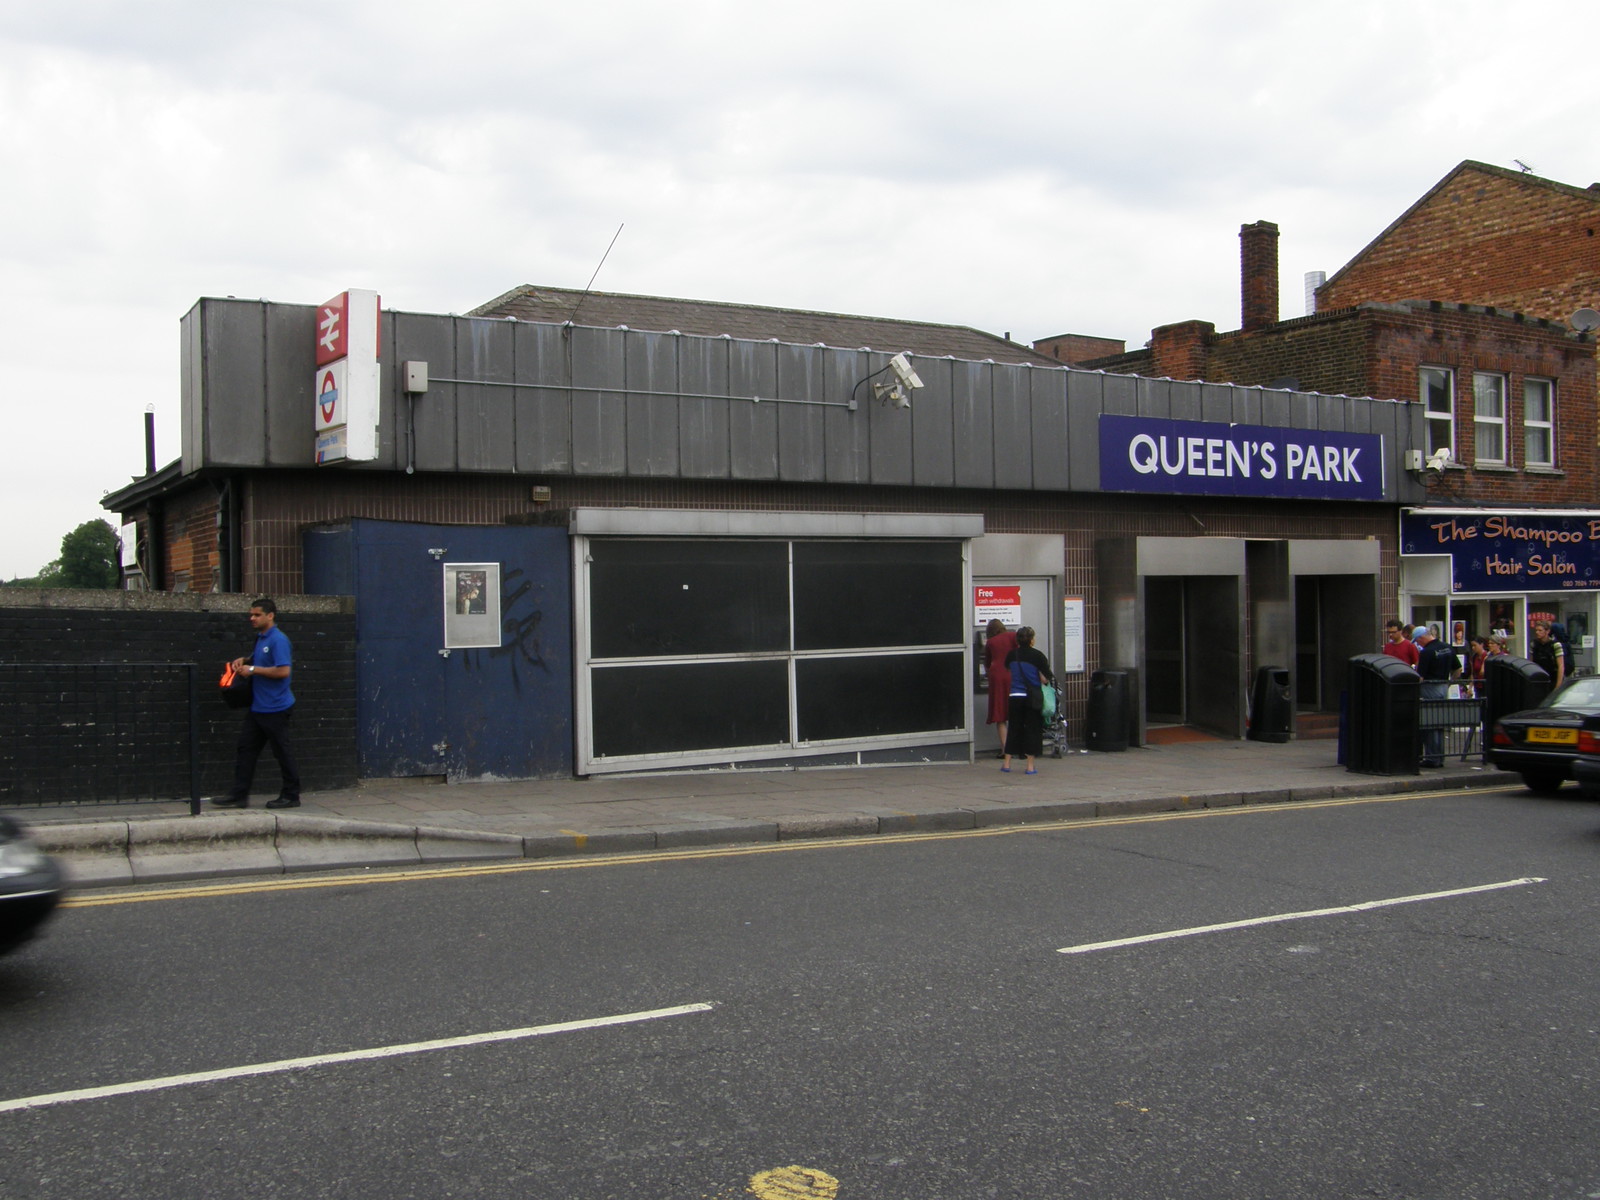 Queen's Park station